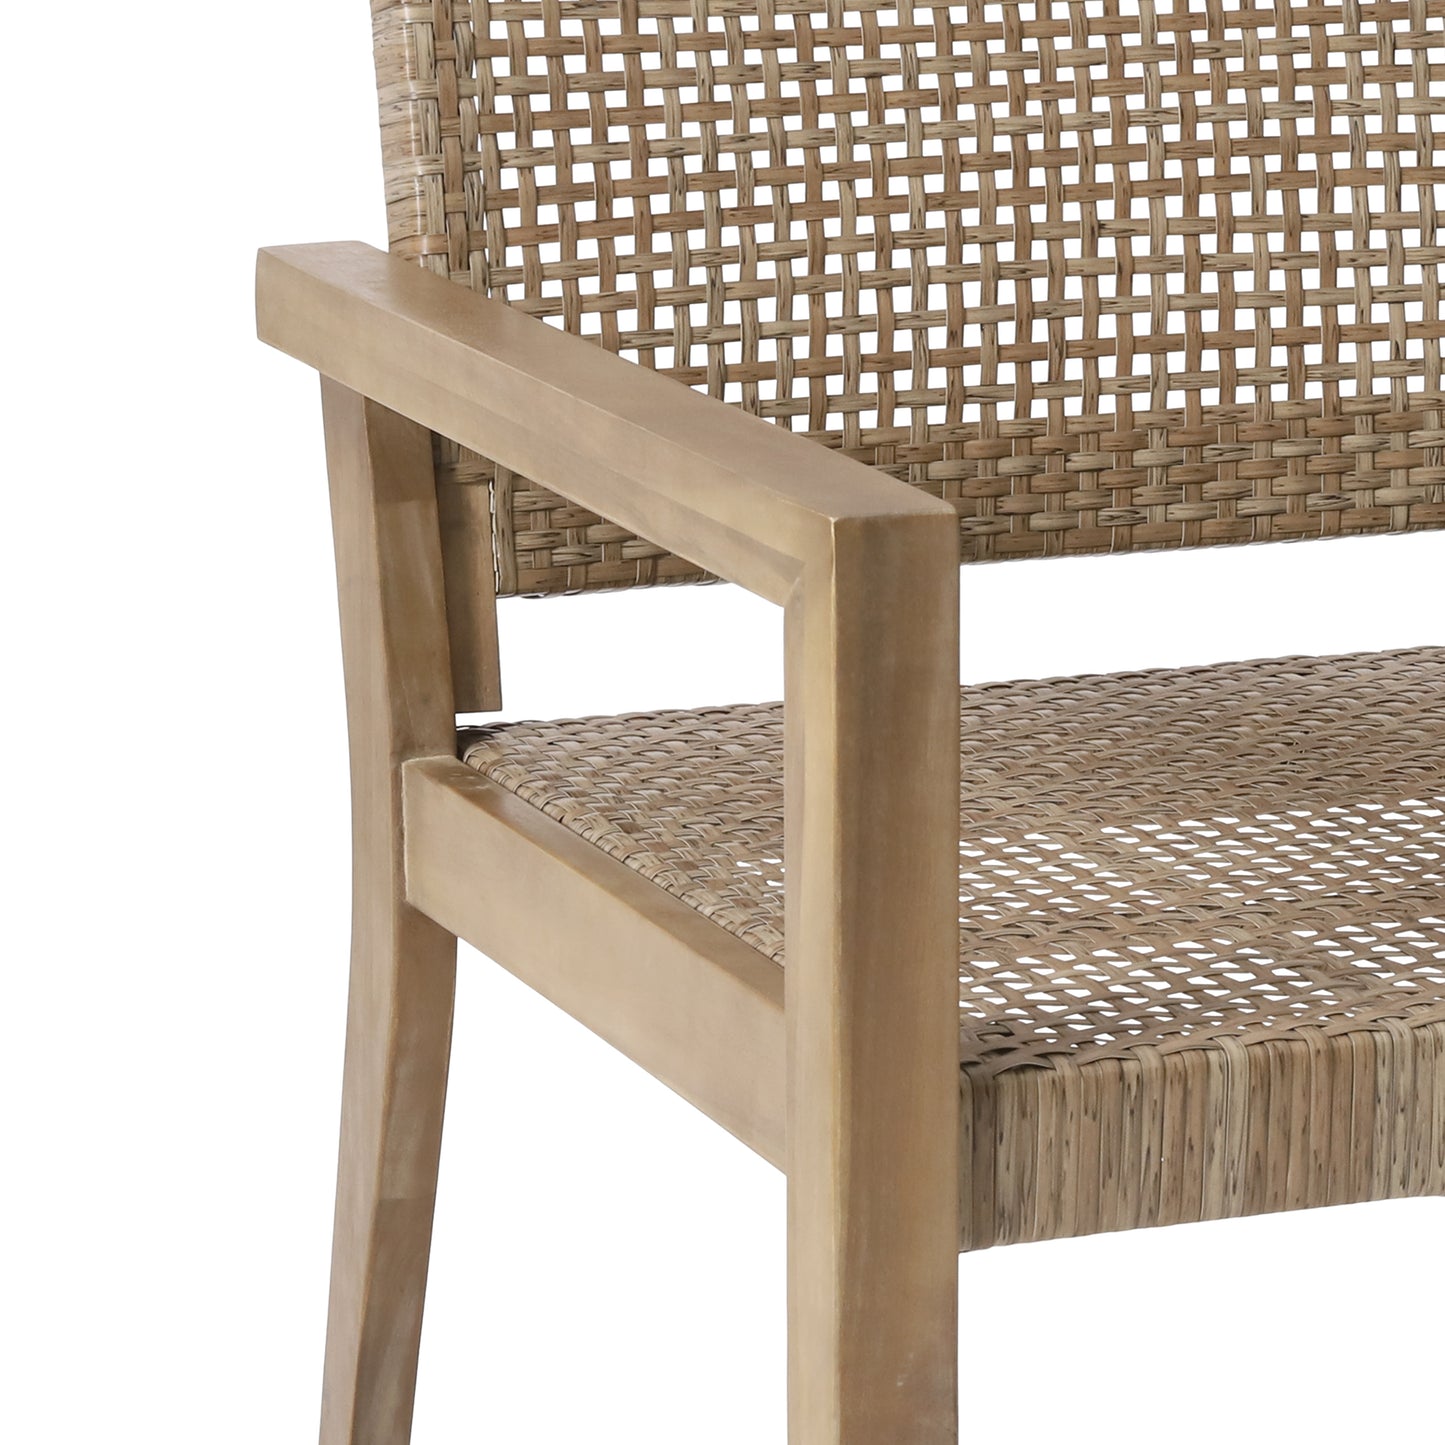 Elmcrest Outdoor Wicker and Acacia Wood Club Chairs, Set of 2, Light Multibrown and Light Brown